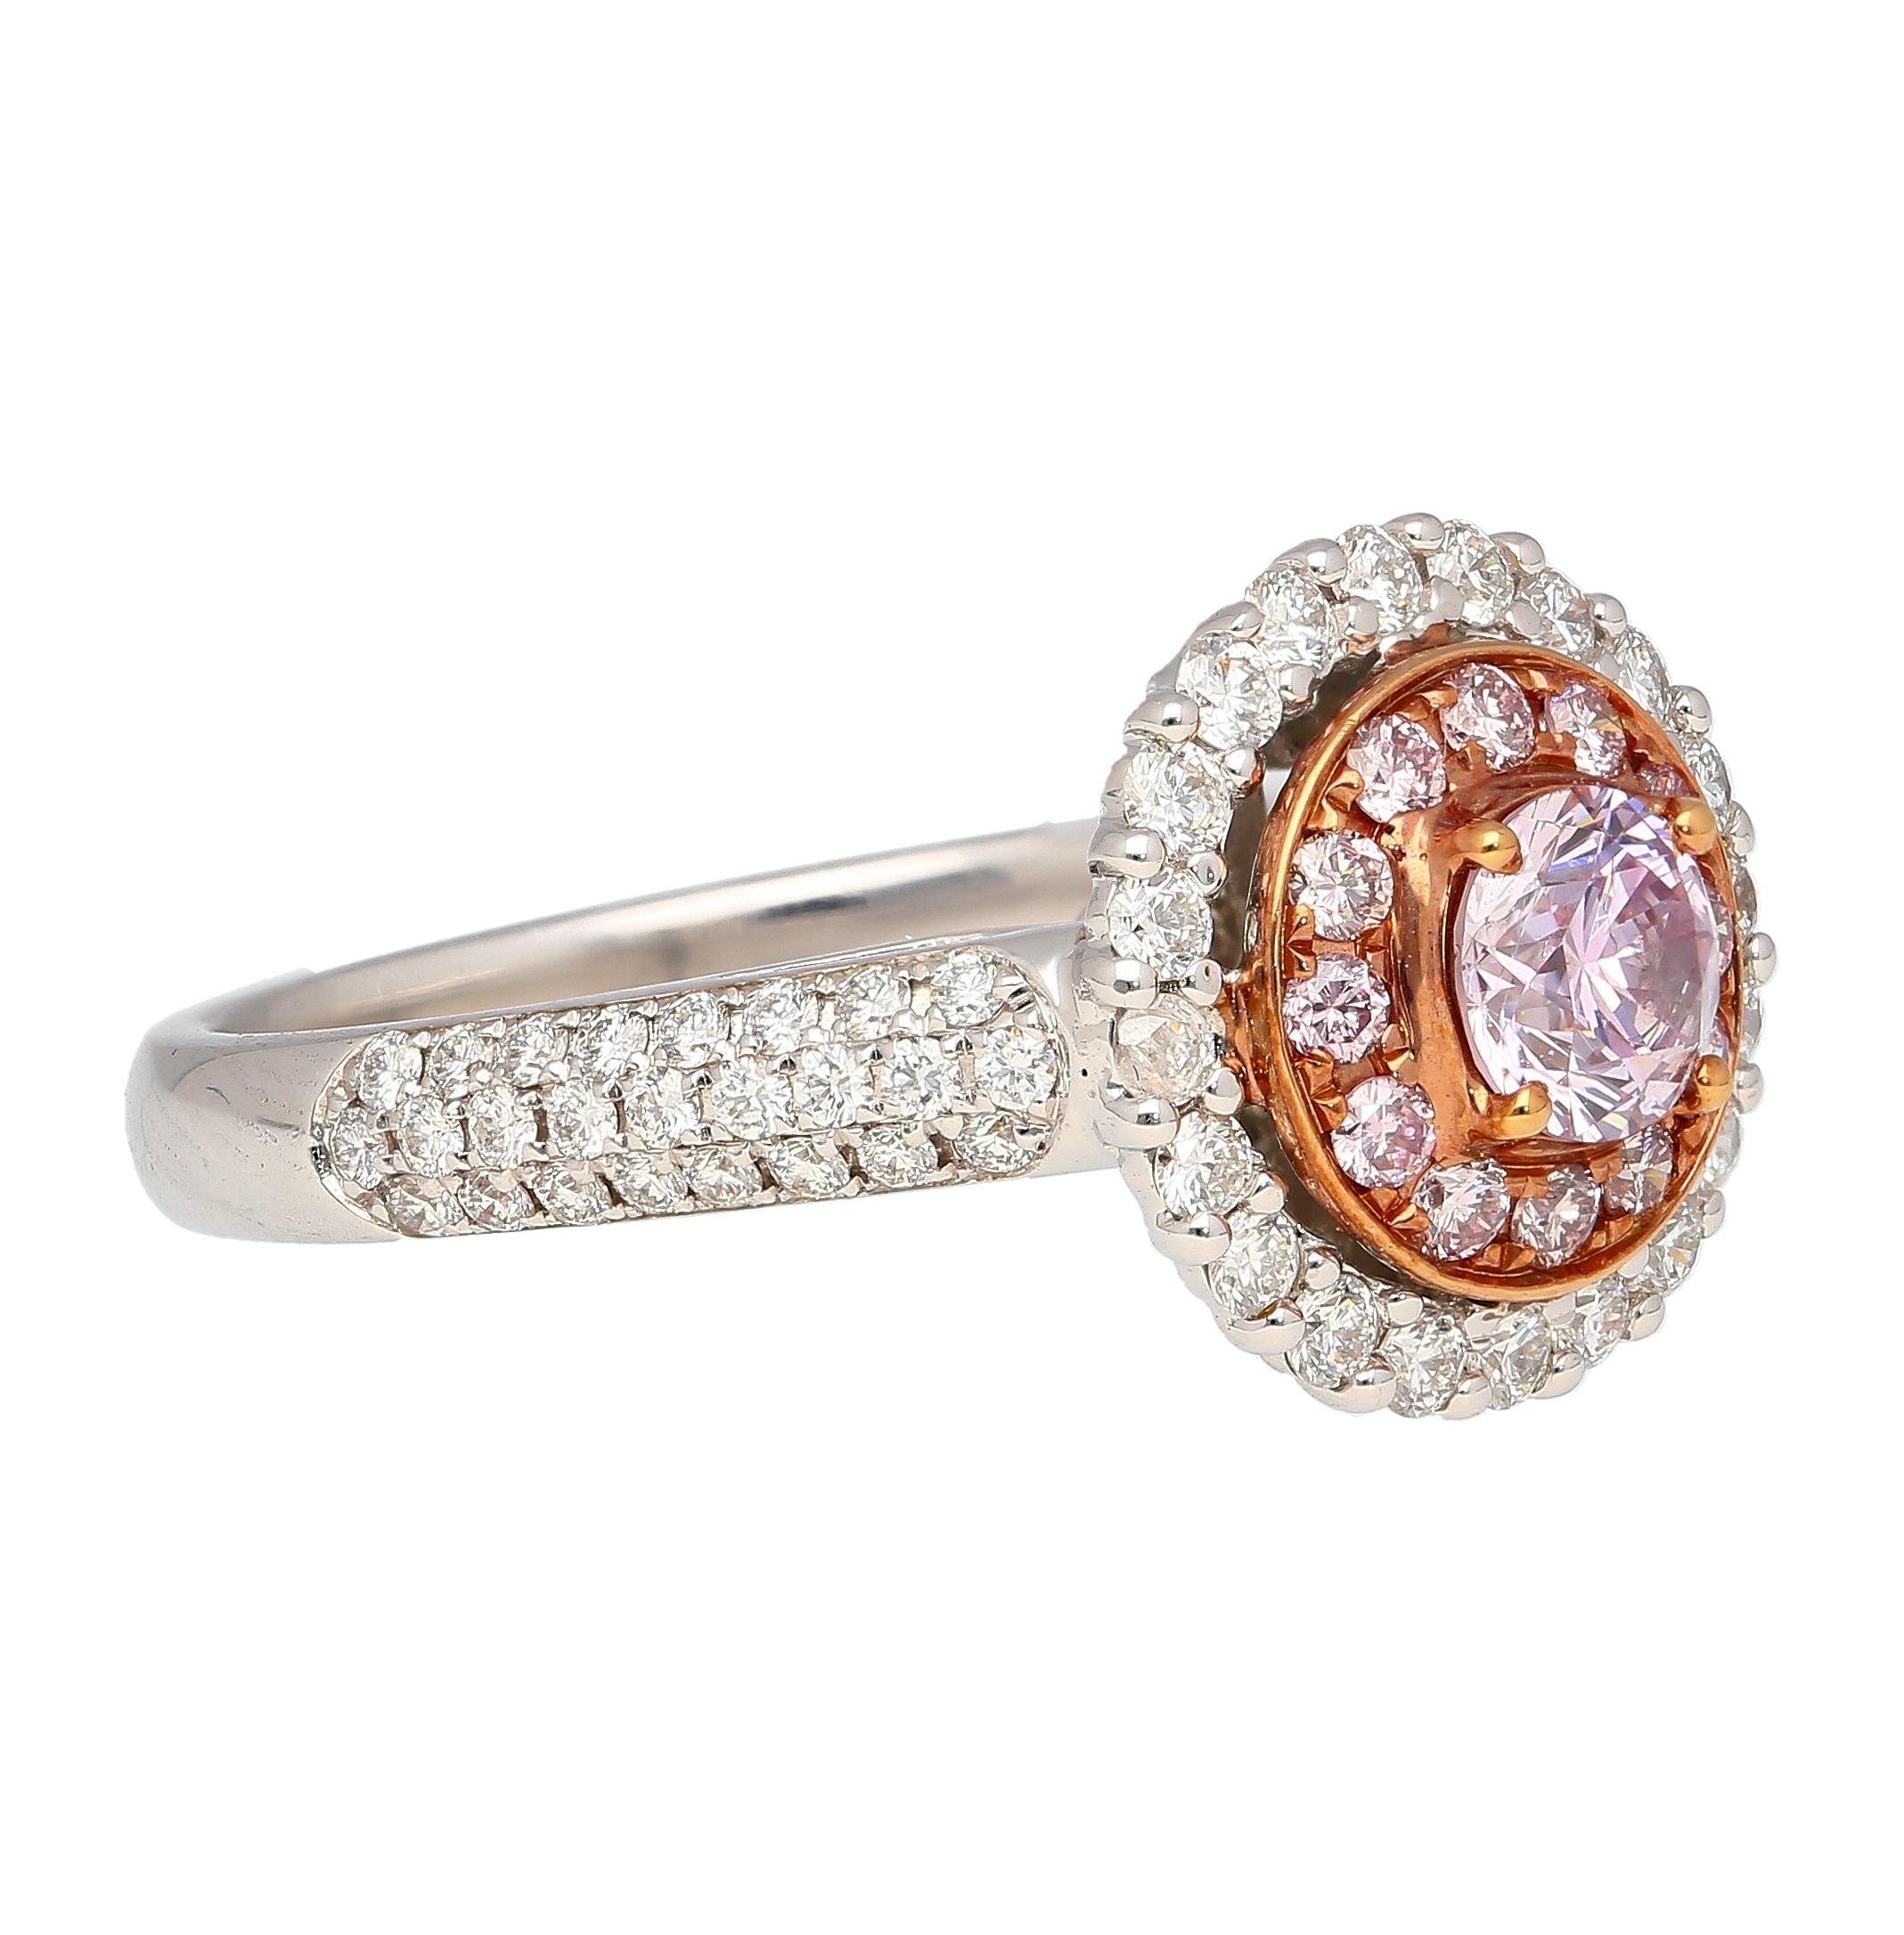 Round Cut GIA Certified 1.38 CTW Round Fancy Pink-Purple Diamond Ring with Diamond Halo For Sale